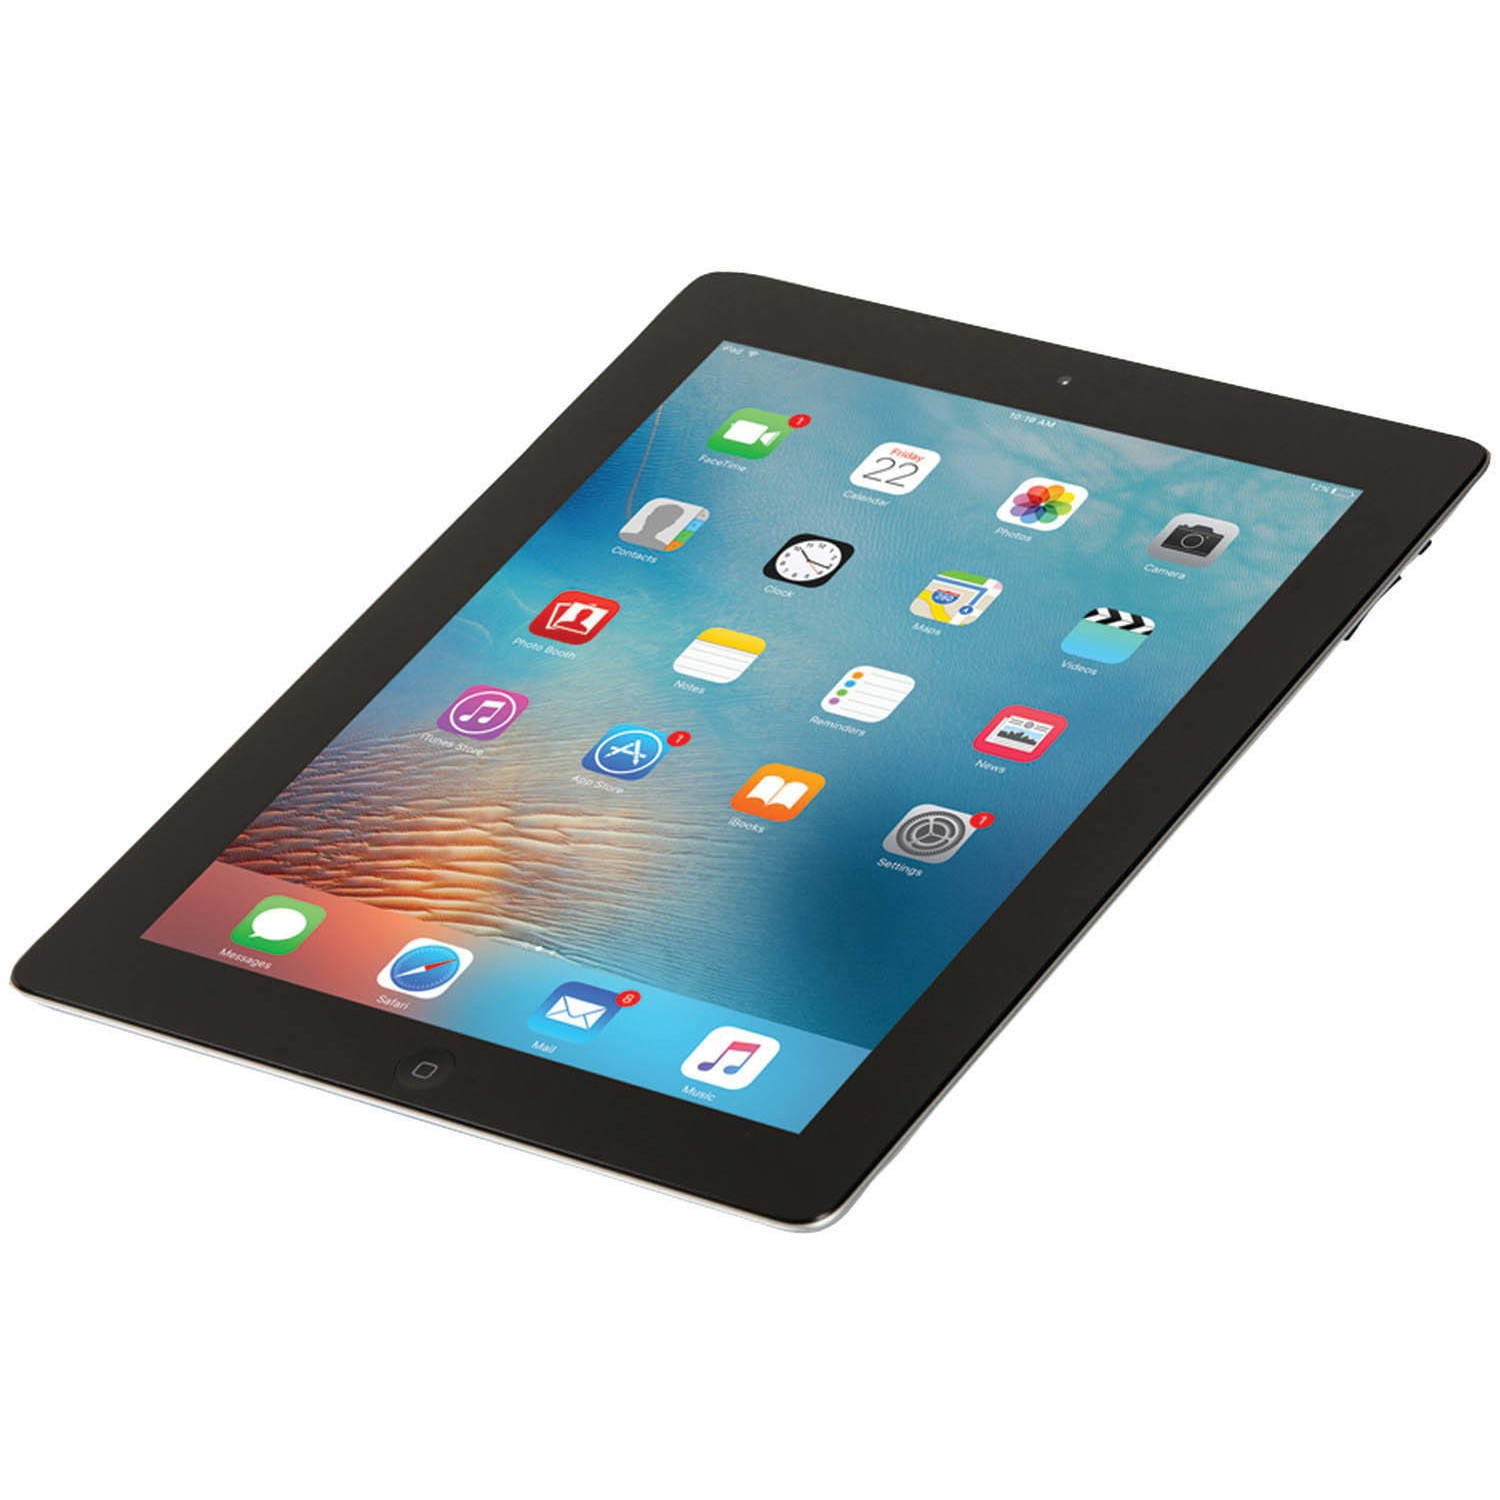 Restored Apple iPad 2 MC769LL/A with Wi-Fi 9.7 Touchscreen Tablet  Featuring Apple iOS 8 Operating System (Refurbished) 